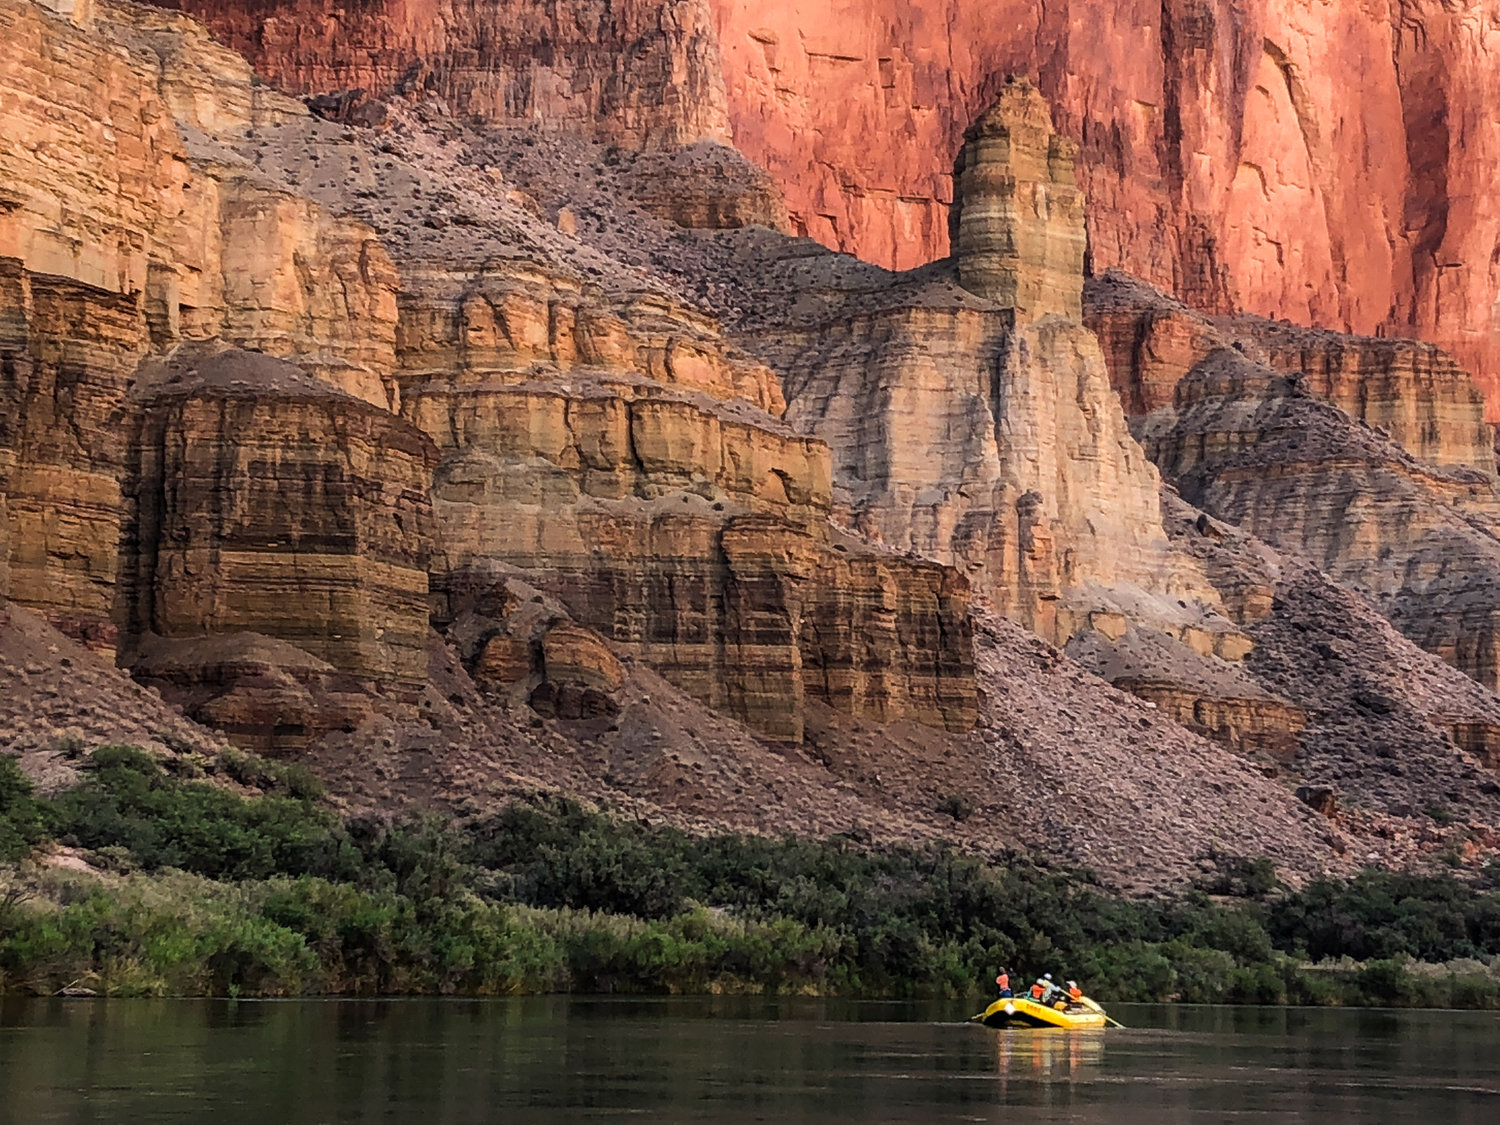 Floating 200 miles through the Grand Canyon - 12 Timeless Days ...